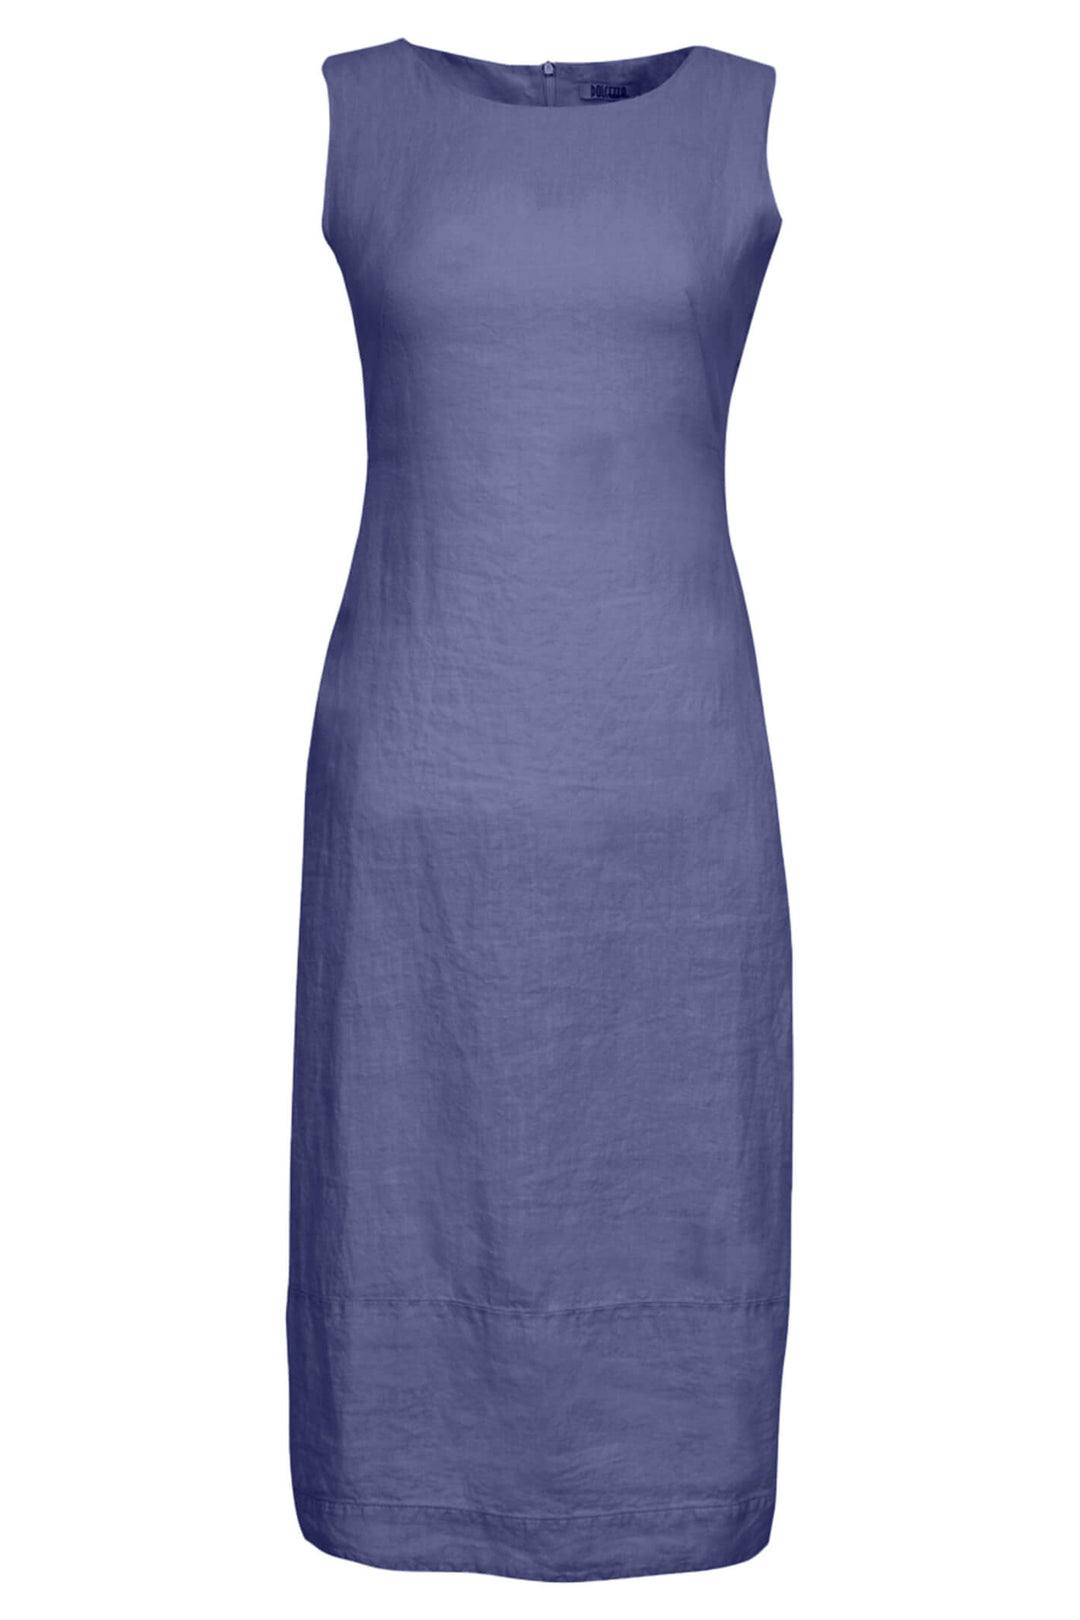 Dolcezza 23165 Navy Dress - Experience Boutique